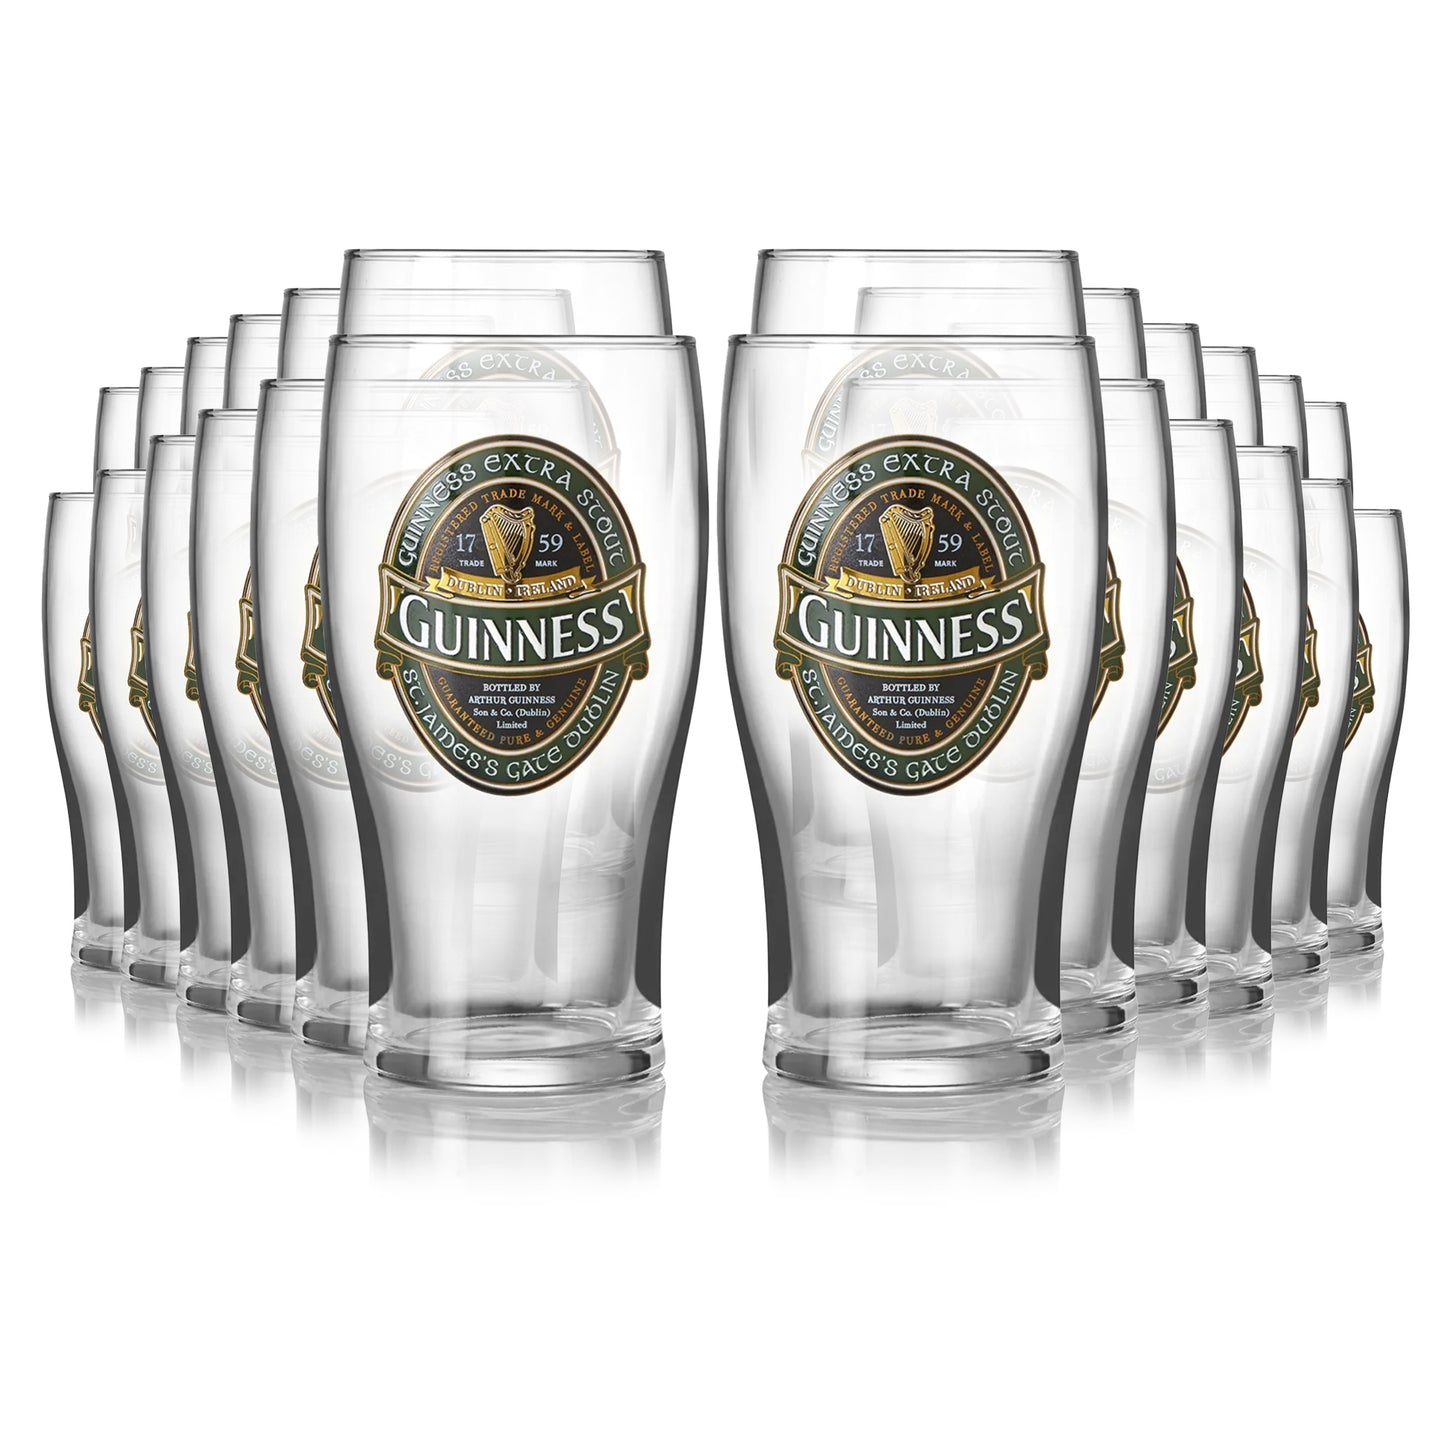 Eight Guinness Ireland Collection Pint Glasses - 24 Pack featuring the Guinness Ireland Collection Glass on a white background, manufactured by Guinness UK.